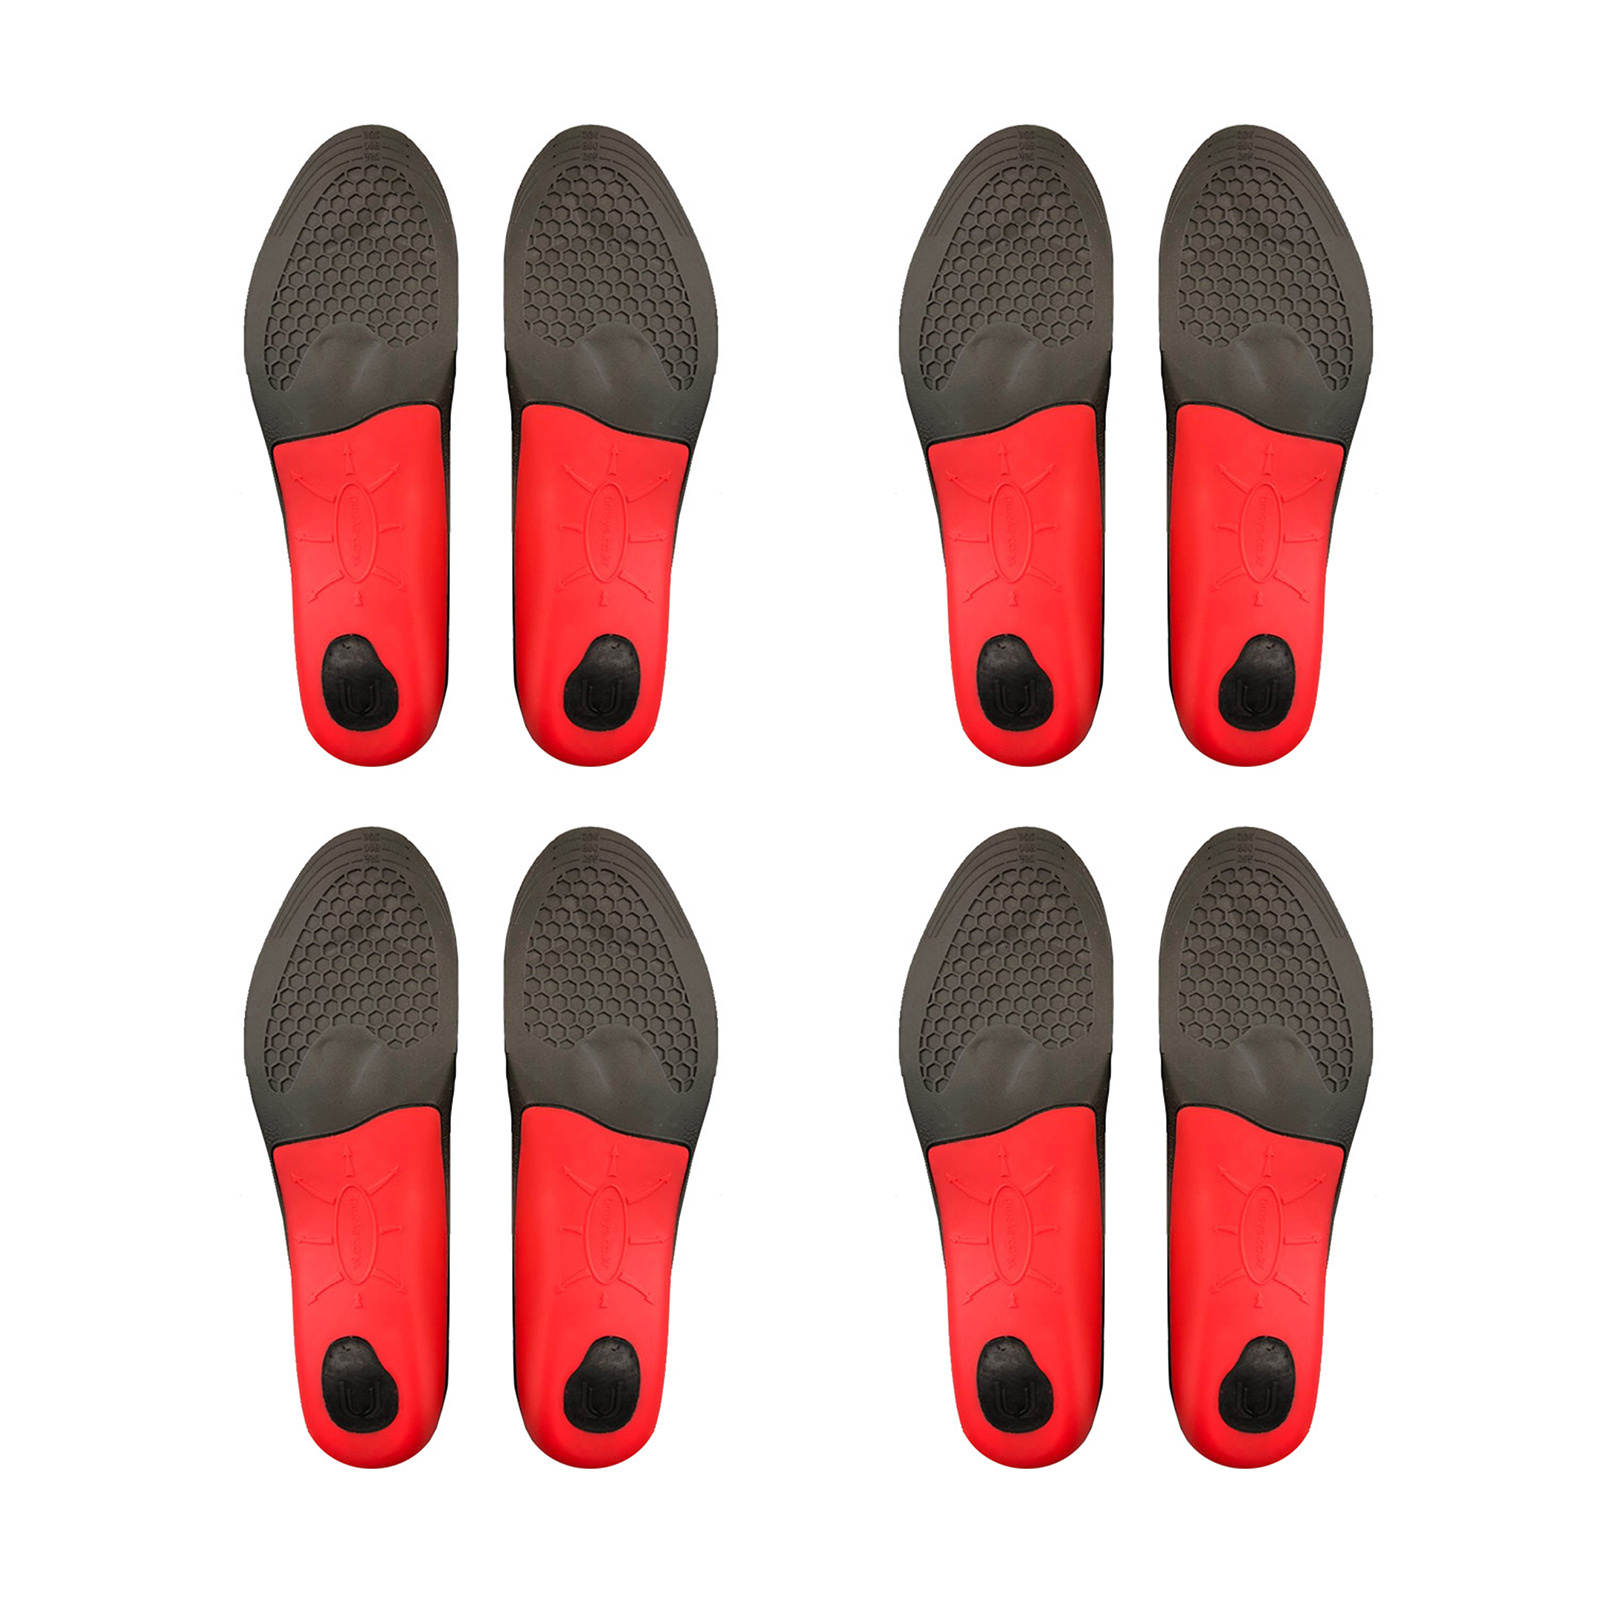 4X Pair Full Whole Shoe Insoles Arch Support Small